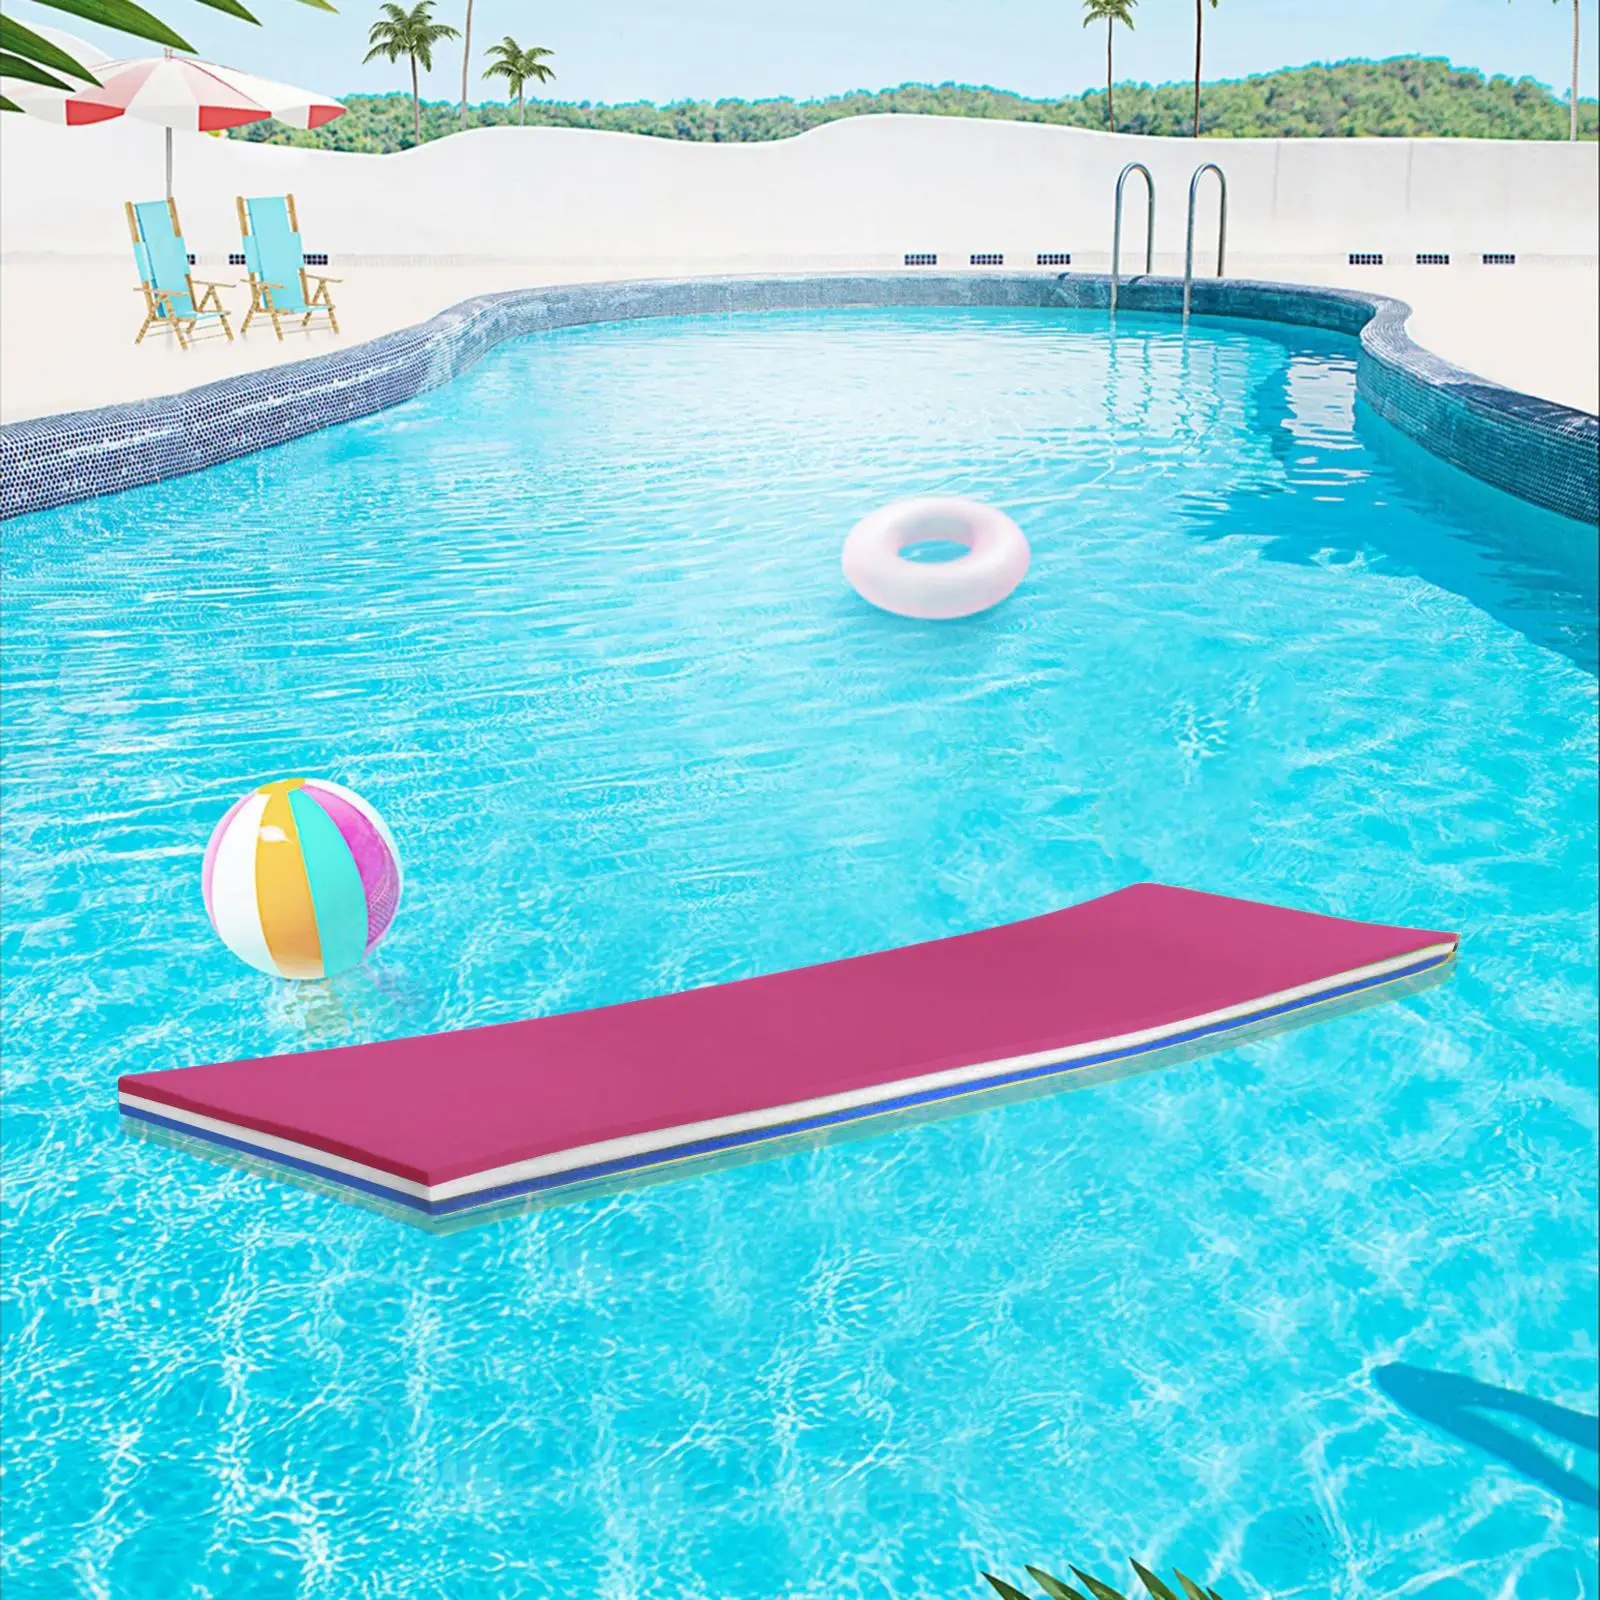 Pool Floating Water Mat 3 Layer Water Raft 43x15.7x1.3Inches for Water Parks, Pools, Lakes, Beaches and Sea Xpe Foam Mat